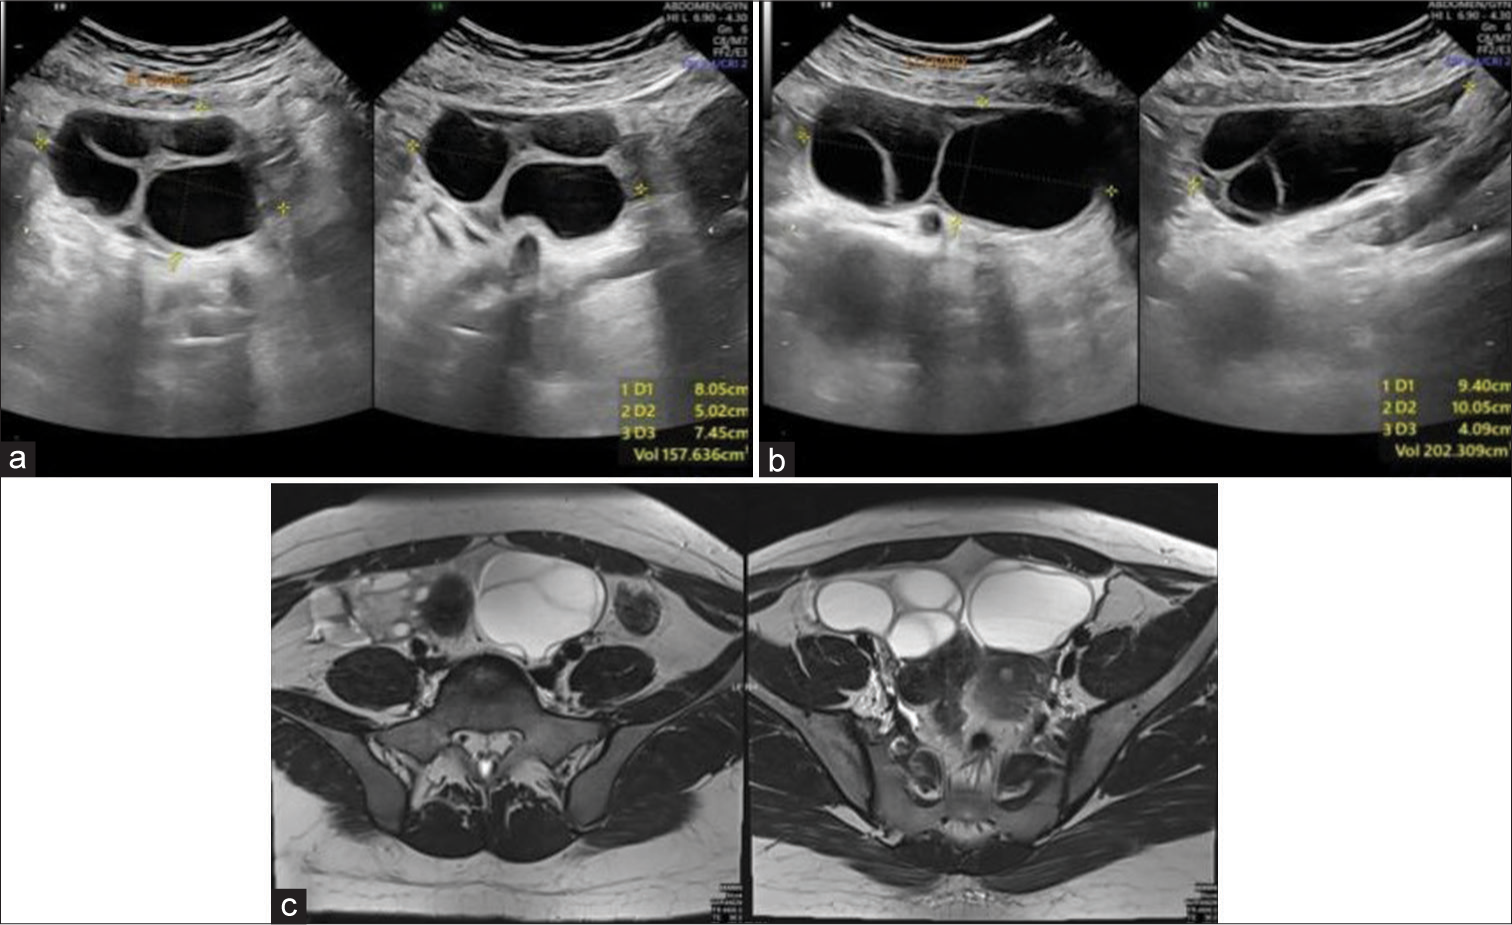 A 19-year-old female presented with ovarian hyperstimulation syndrome who presented with severe abdominal pain (a and b) ultrasound images showing bulky bilateral ovaries with multiple enlarged follicles and (c) axial T2-weighted magnetic resonance imaging section of the pelvis re-demonstrating the ultrasound findings of bulky ovaries with multiple follicles. No e/o torsion was noted.